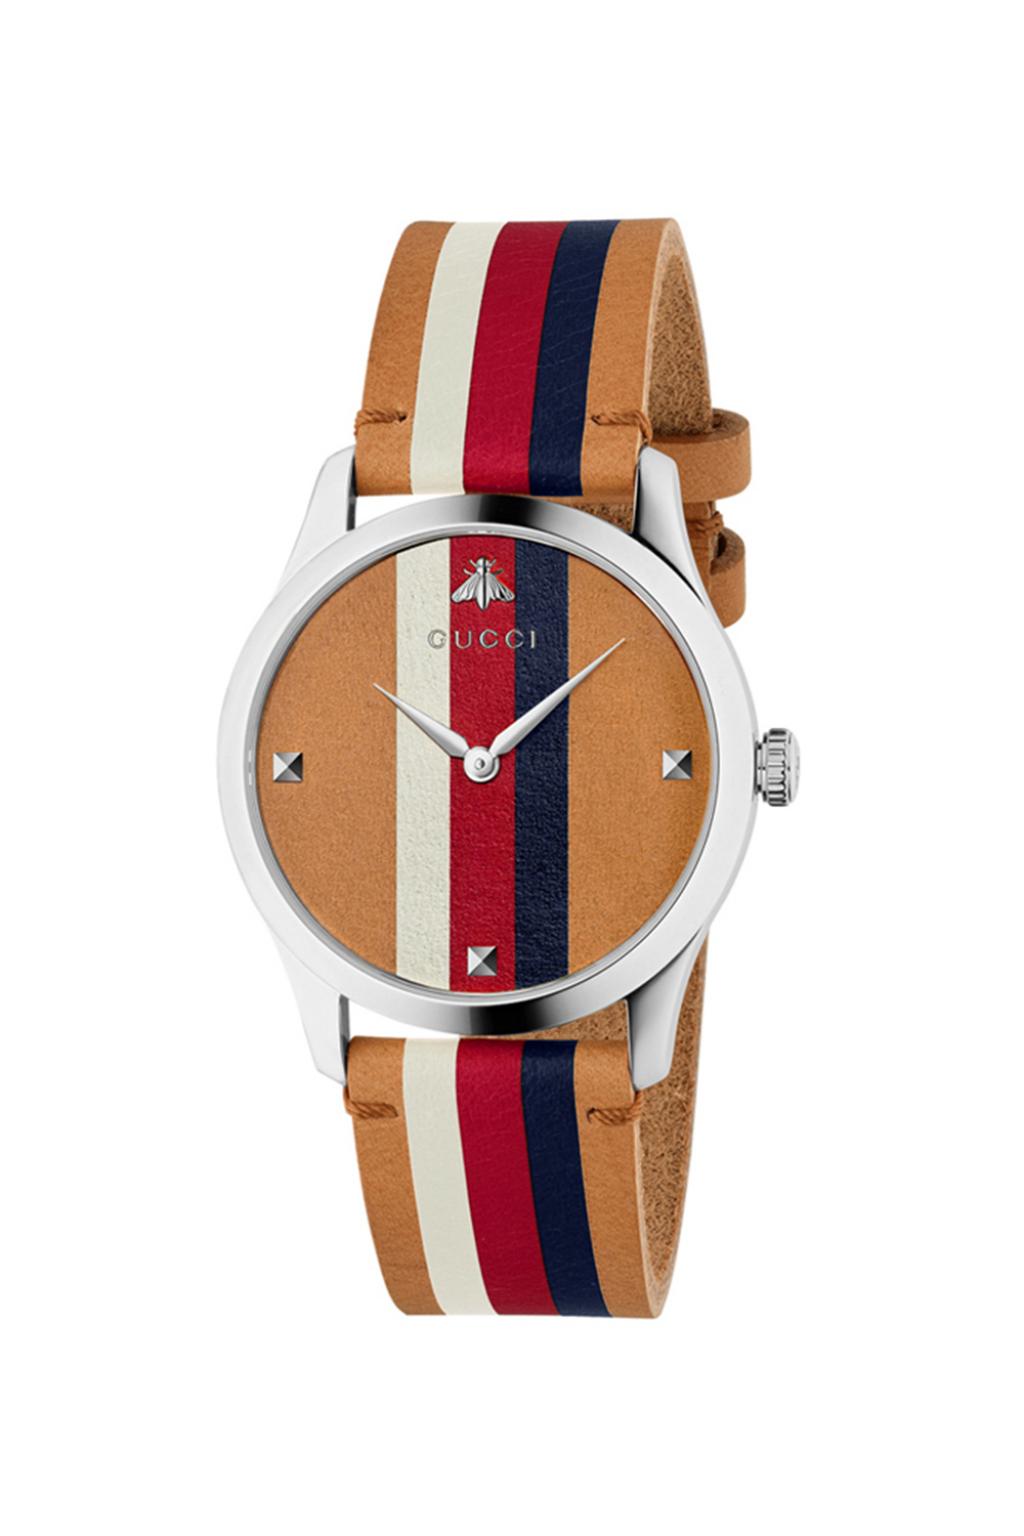 gucci Here 'G-Timeless' watch